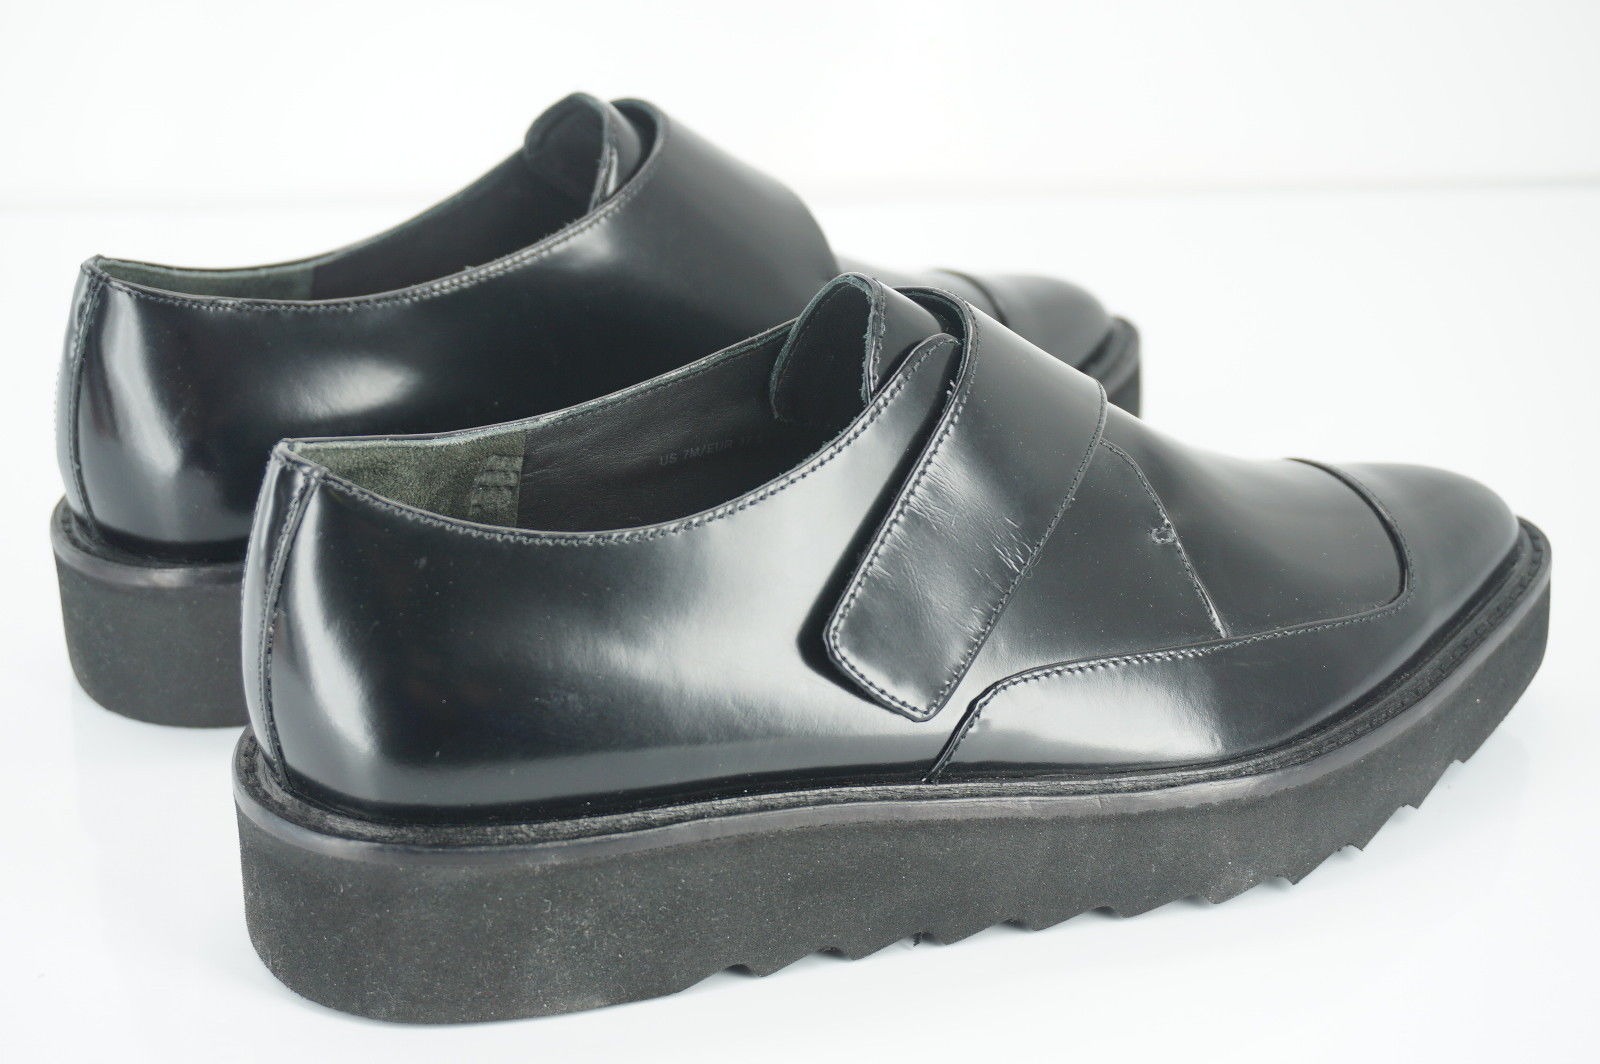 Vince Black Leather Arden Monk Strap Creeper Loafers Size 7.5 Womens NIB $395 Sz